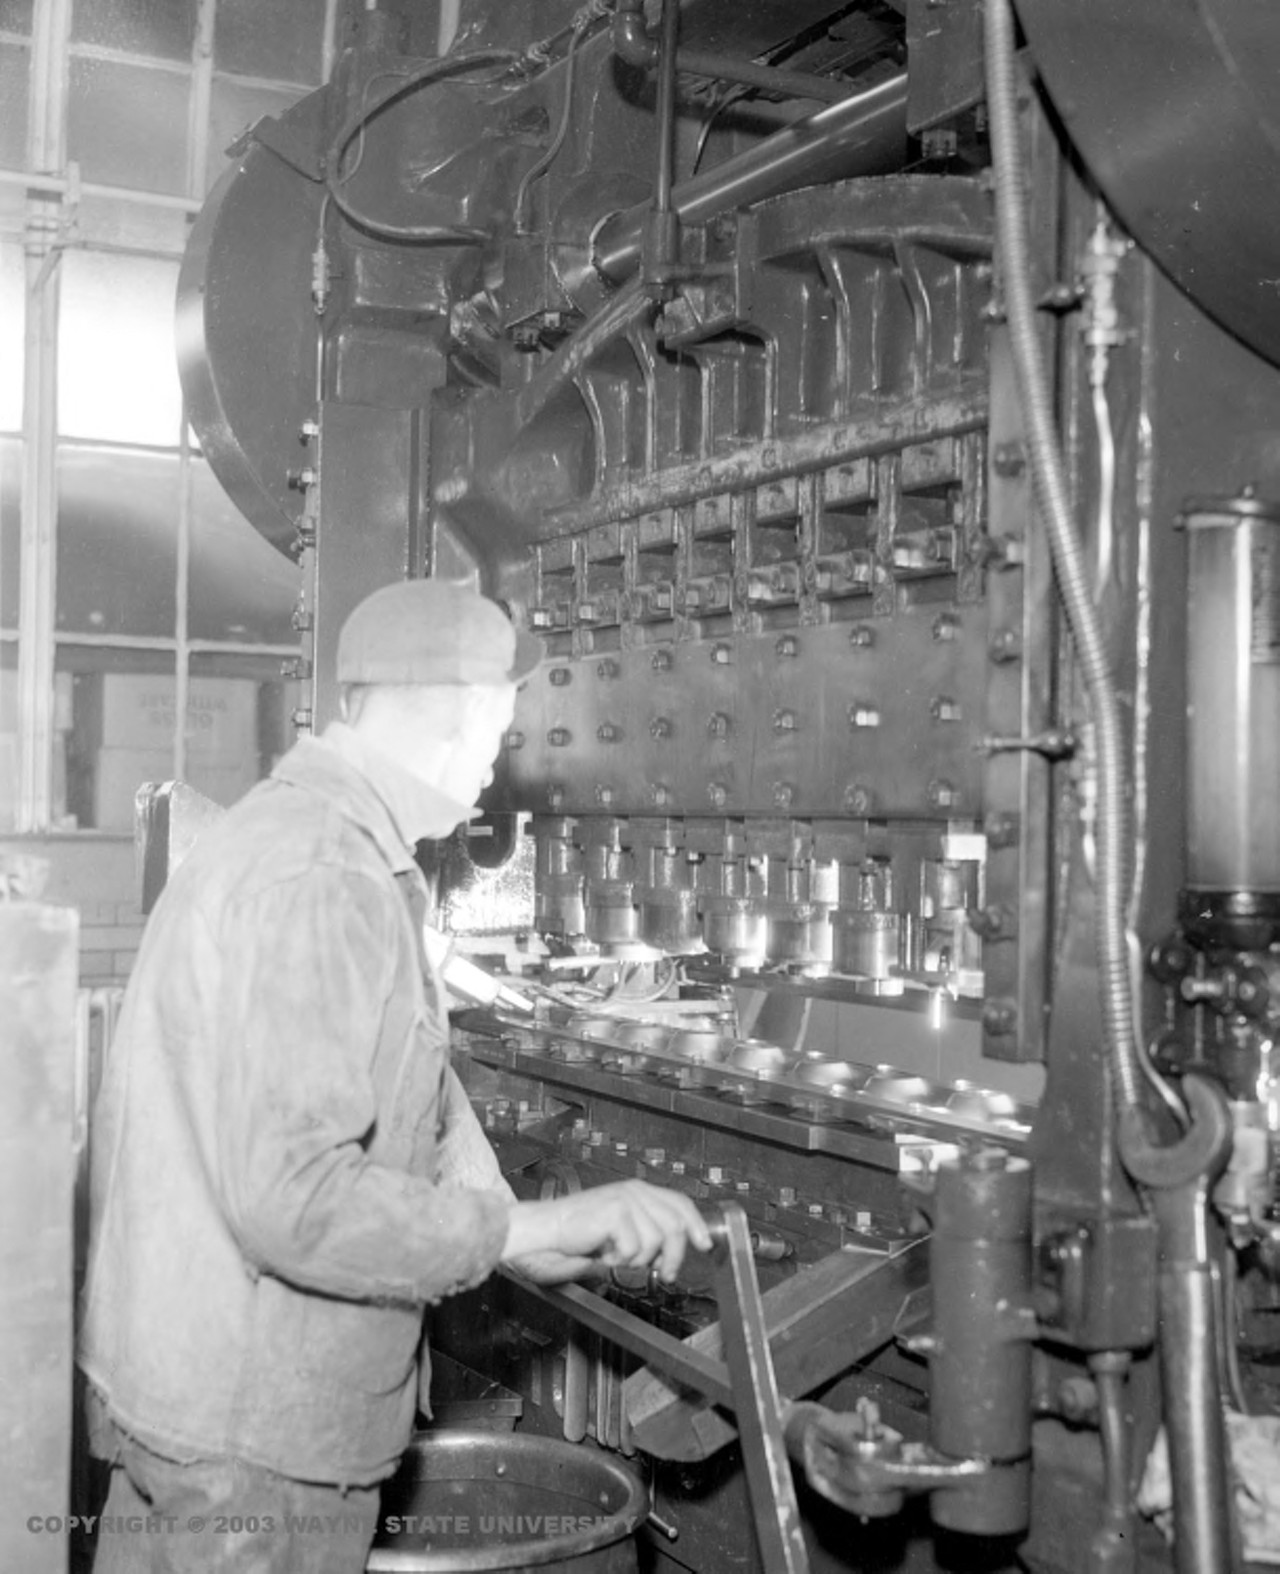 making auto lamps at the Flat Rock plant 
from Virtual Motor City (Photo credit: Detroit News Collection, Walter P. Reuther Library, Wayne State University)